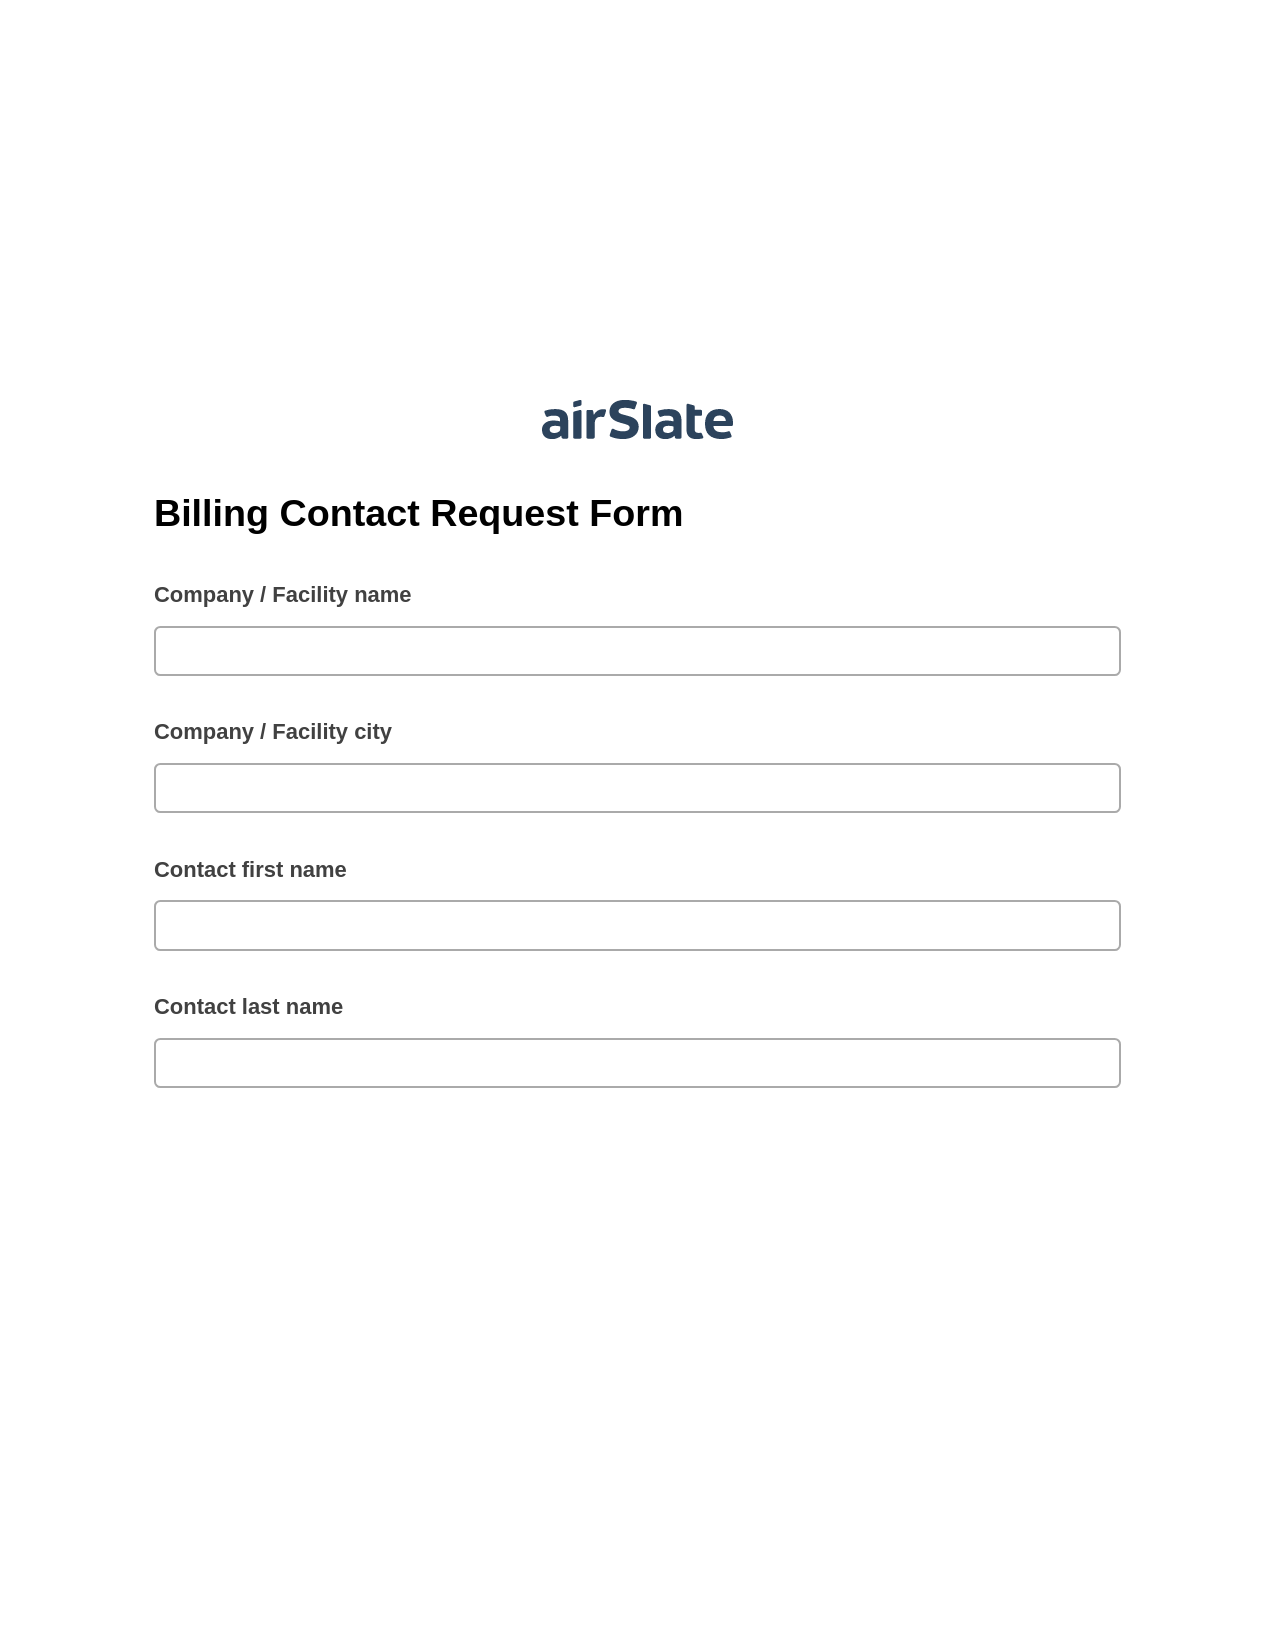 Billing Contact Request Form Pre-fill from Salesforce Records with SOQL Bot, Reminder Bot, Webhook Postfinish Bot